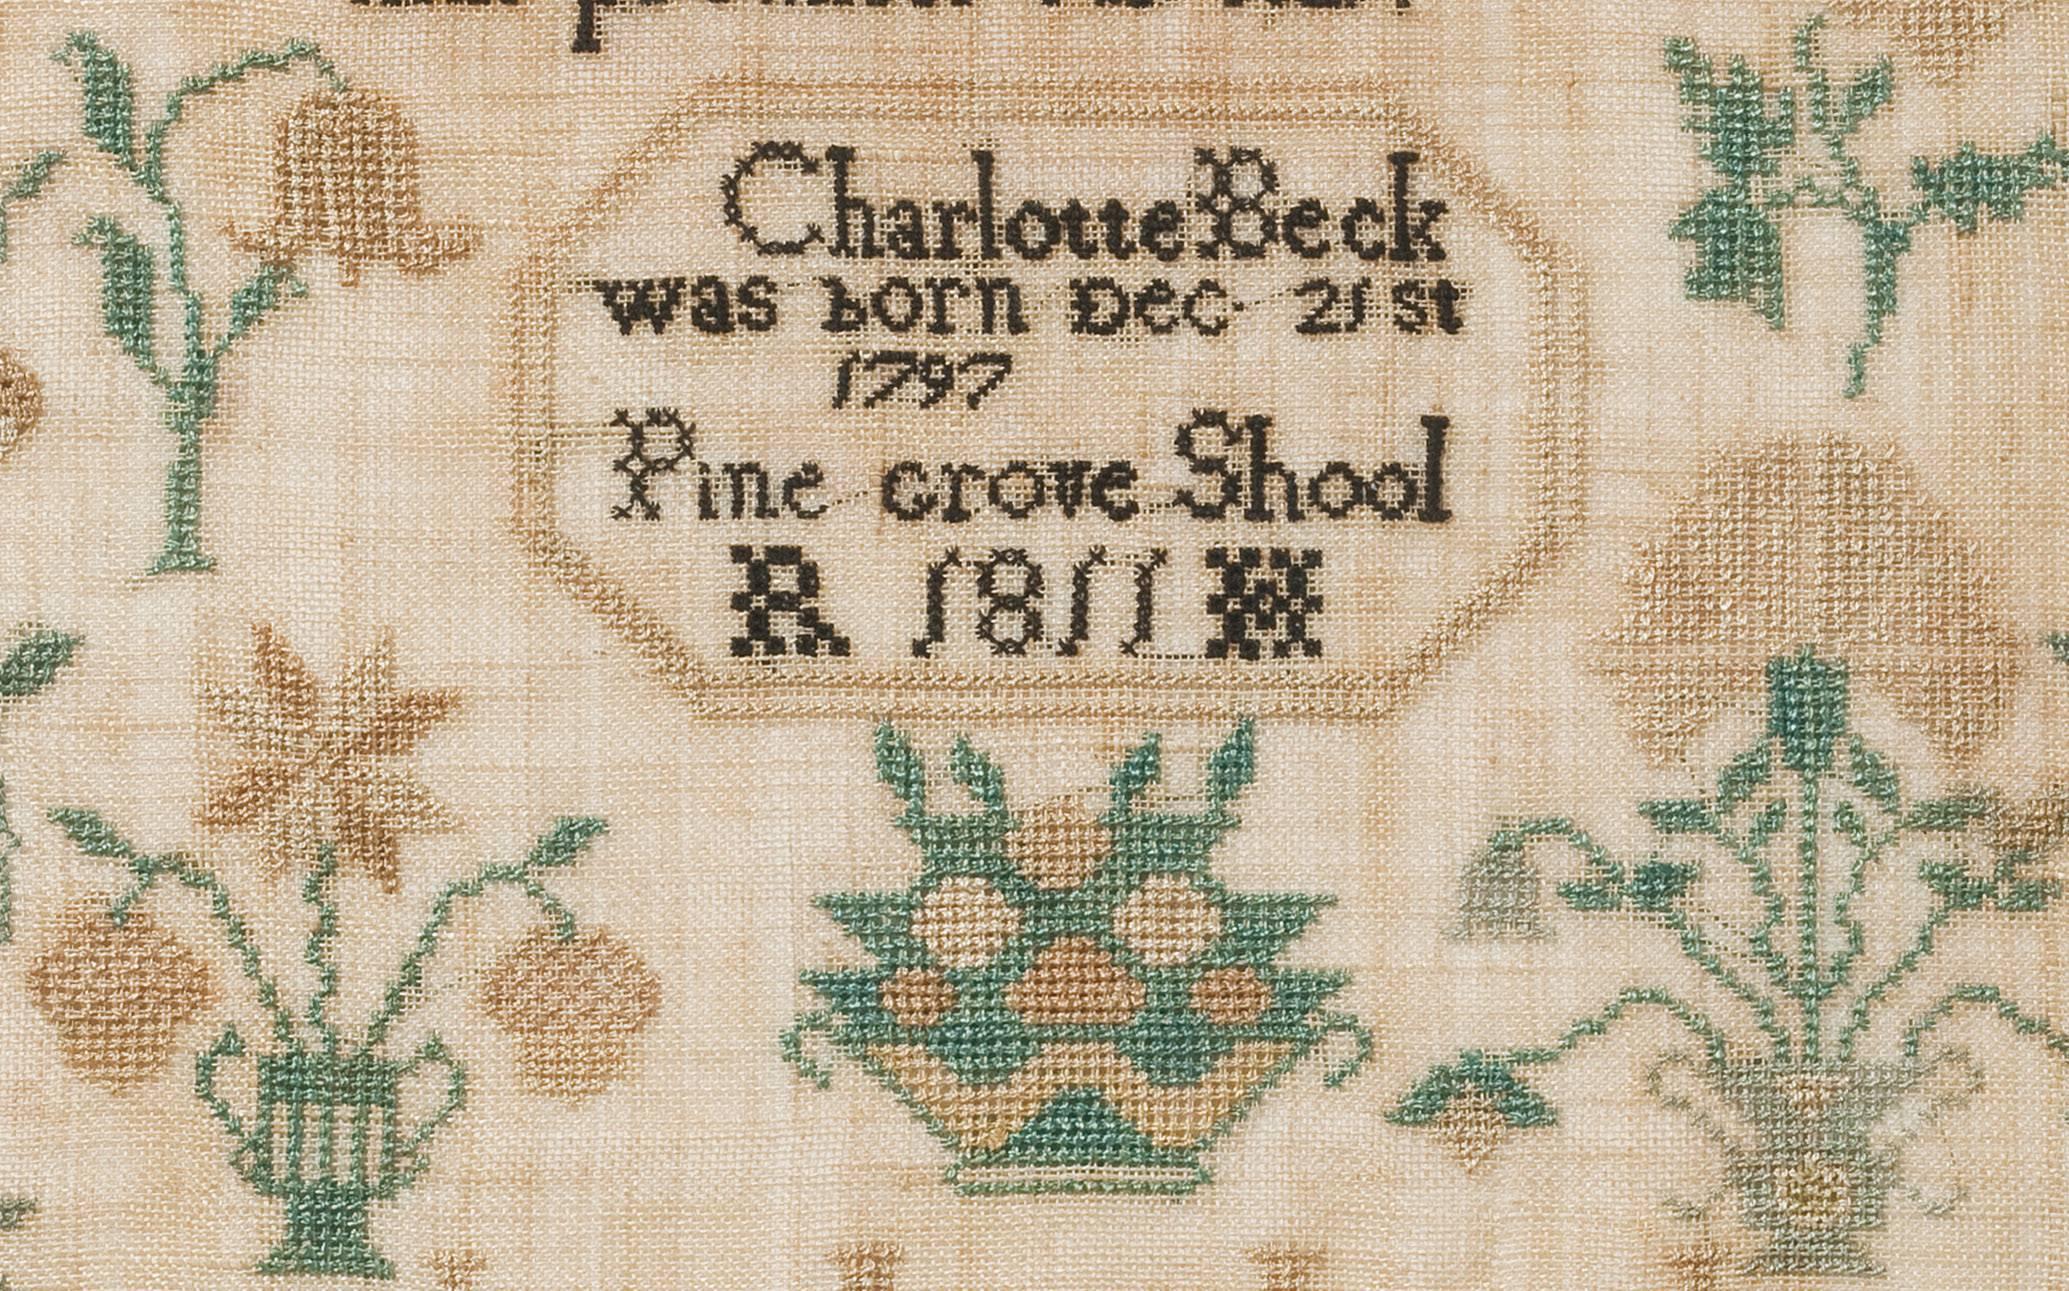 Charlotte Beck worked this excellent sampler while attending the Pine Grove School, a Quaker school near Evesham, Burlington County, New Jersey which first opened its doors in 1792. Interestingly, the sampler includes a depiction of Westtown School